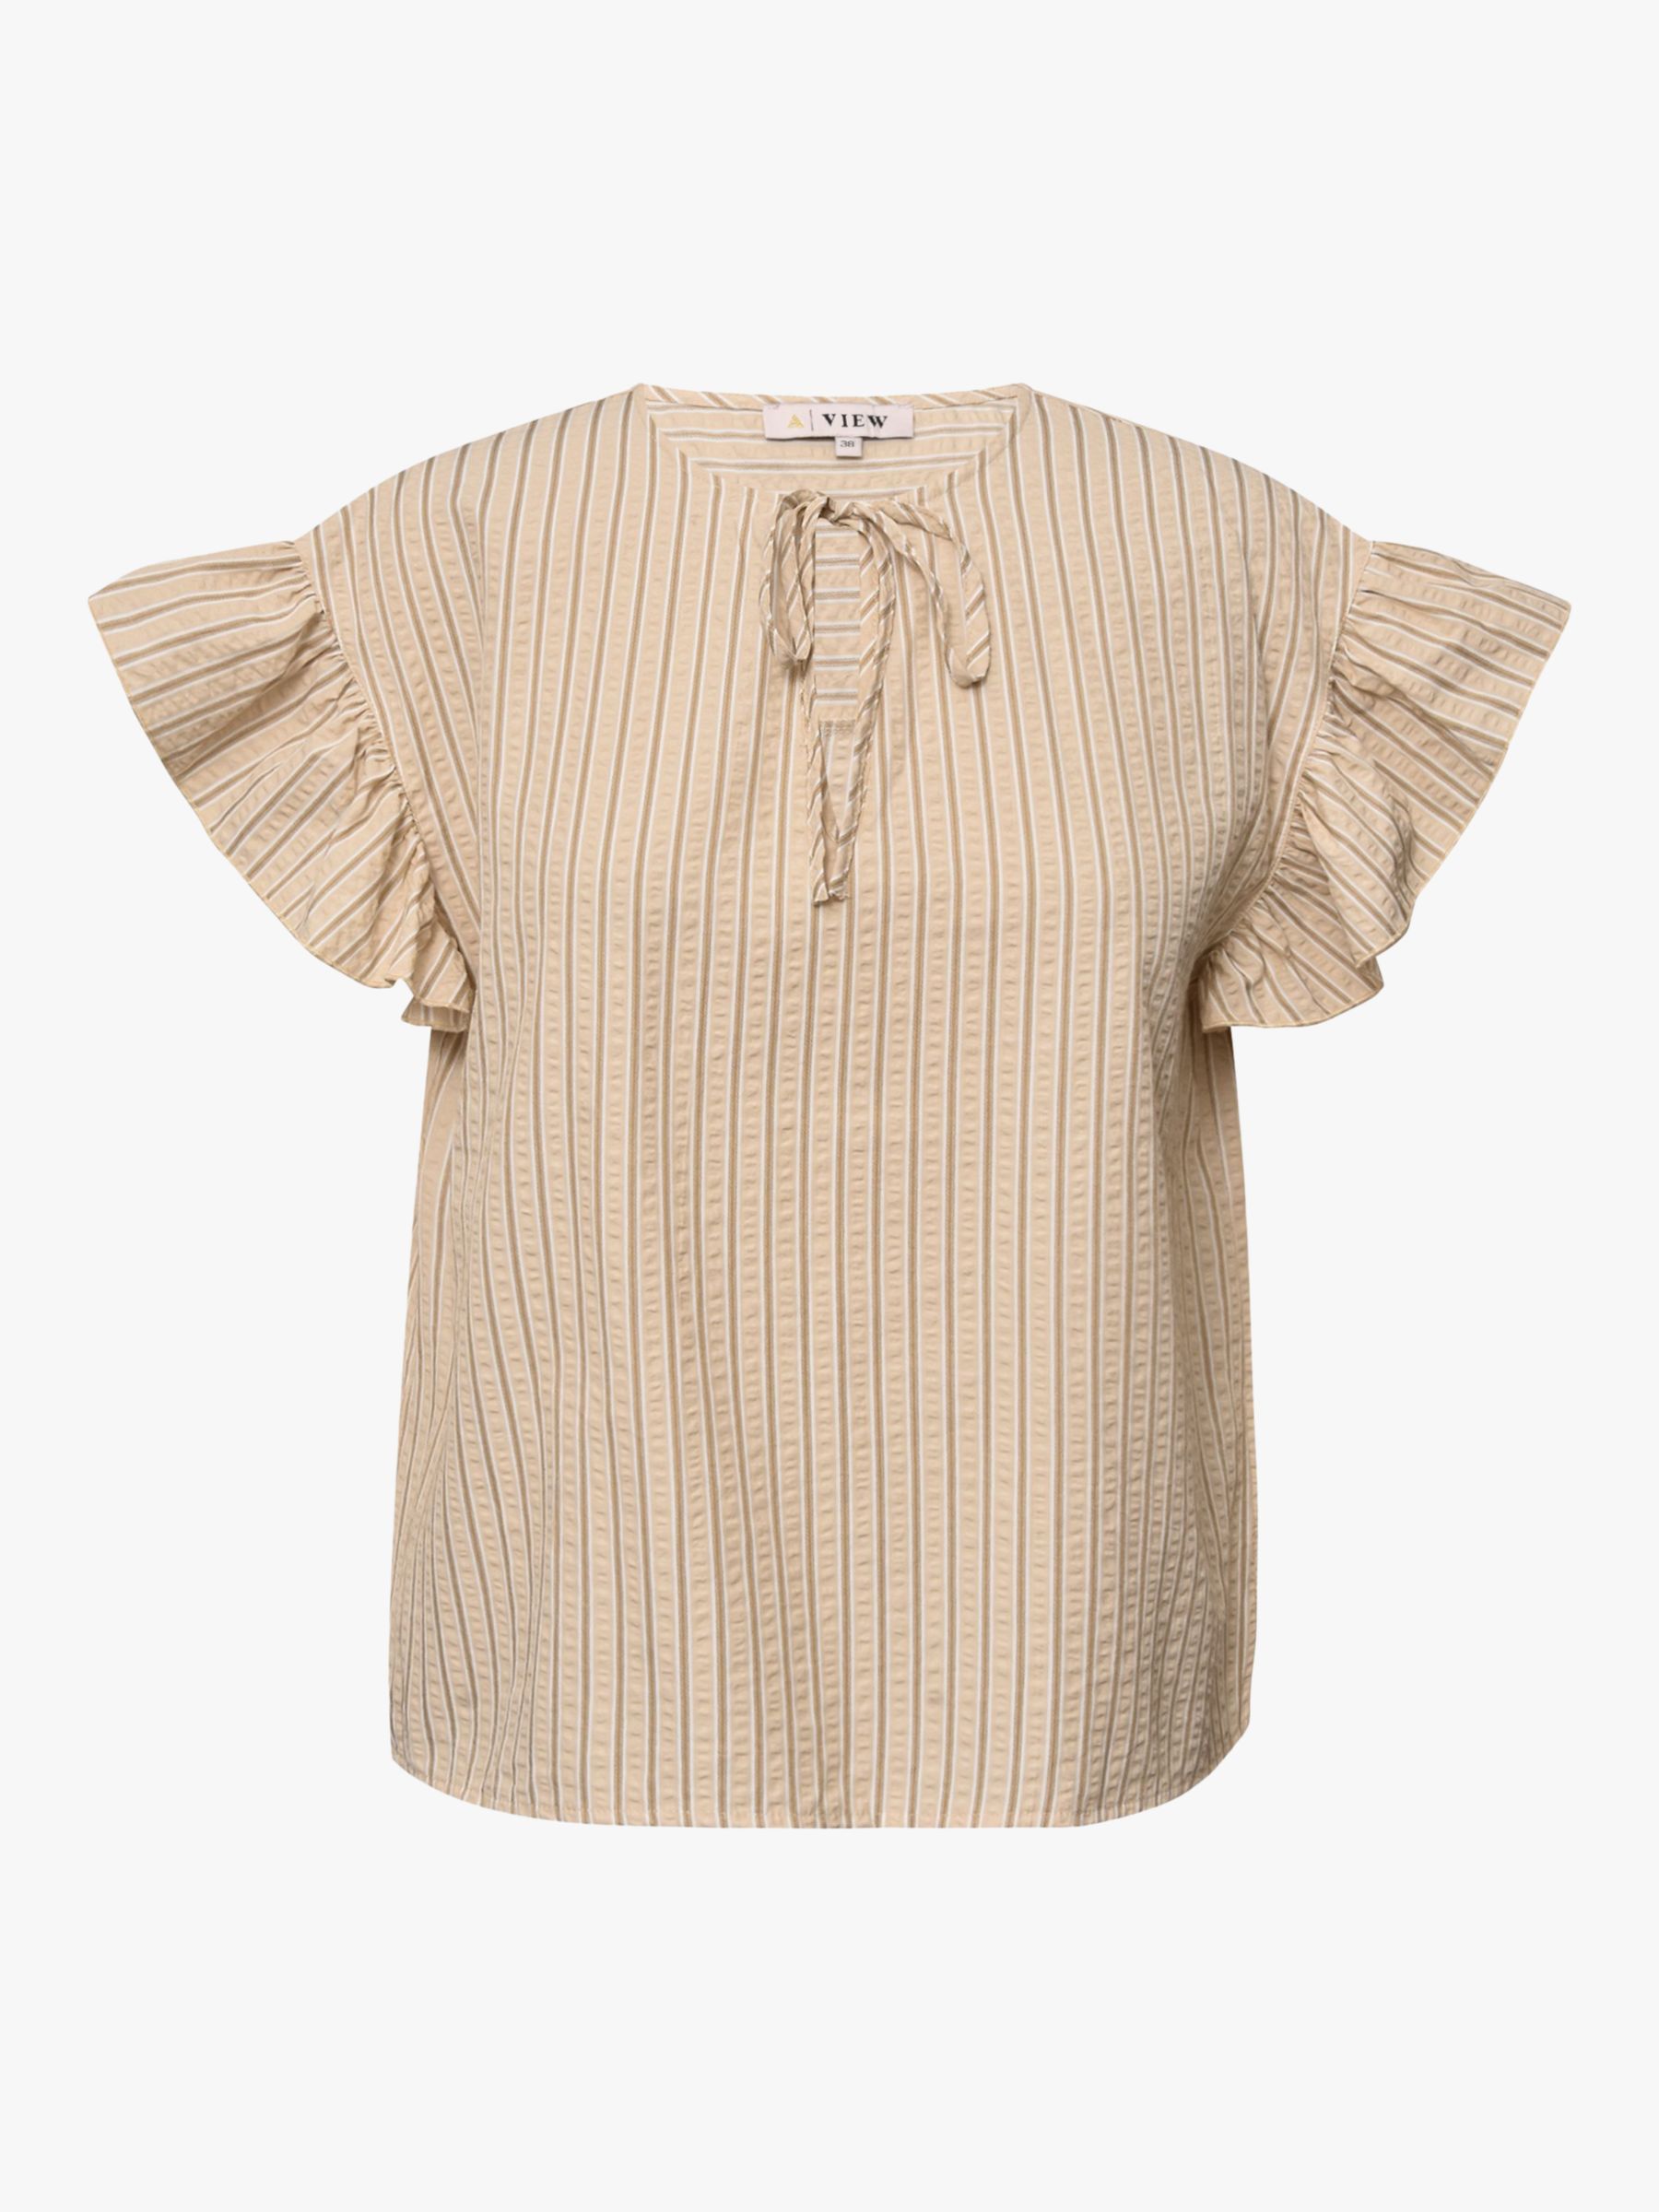 Buy A-VIEW Bell Cotton Blend Short Sleeve Top Online at johnlewis.com